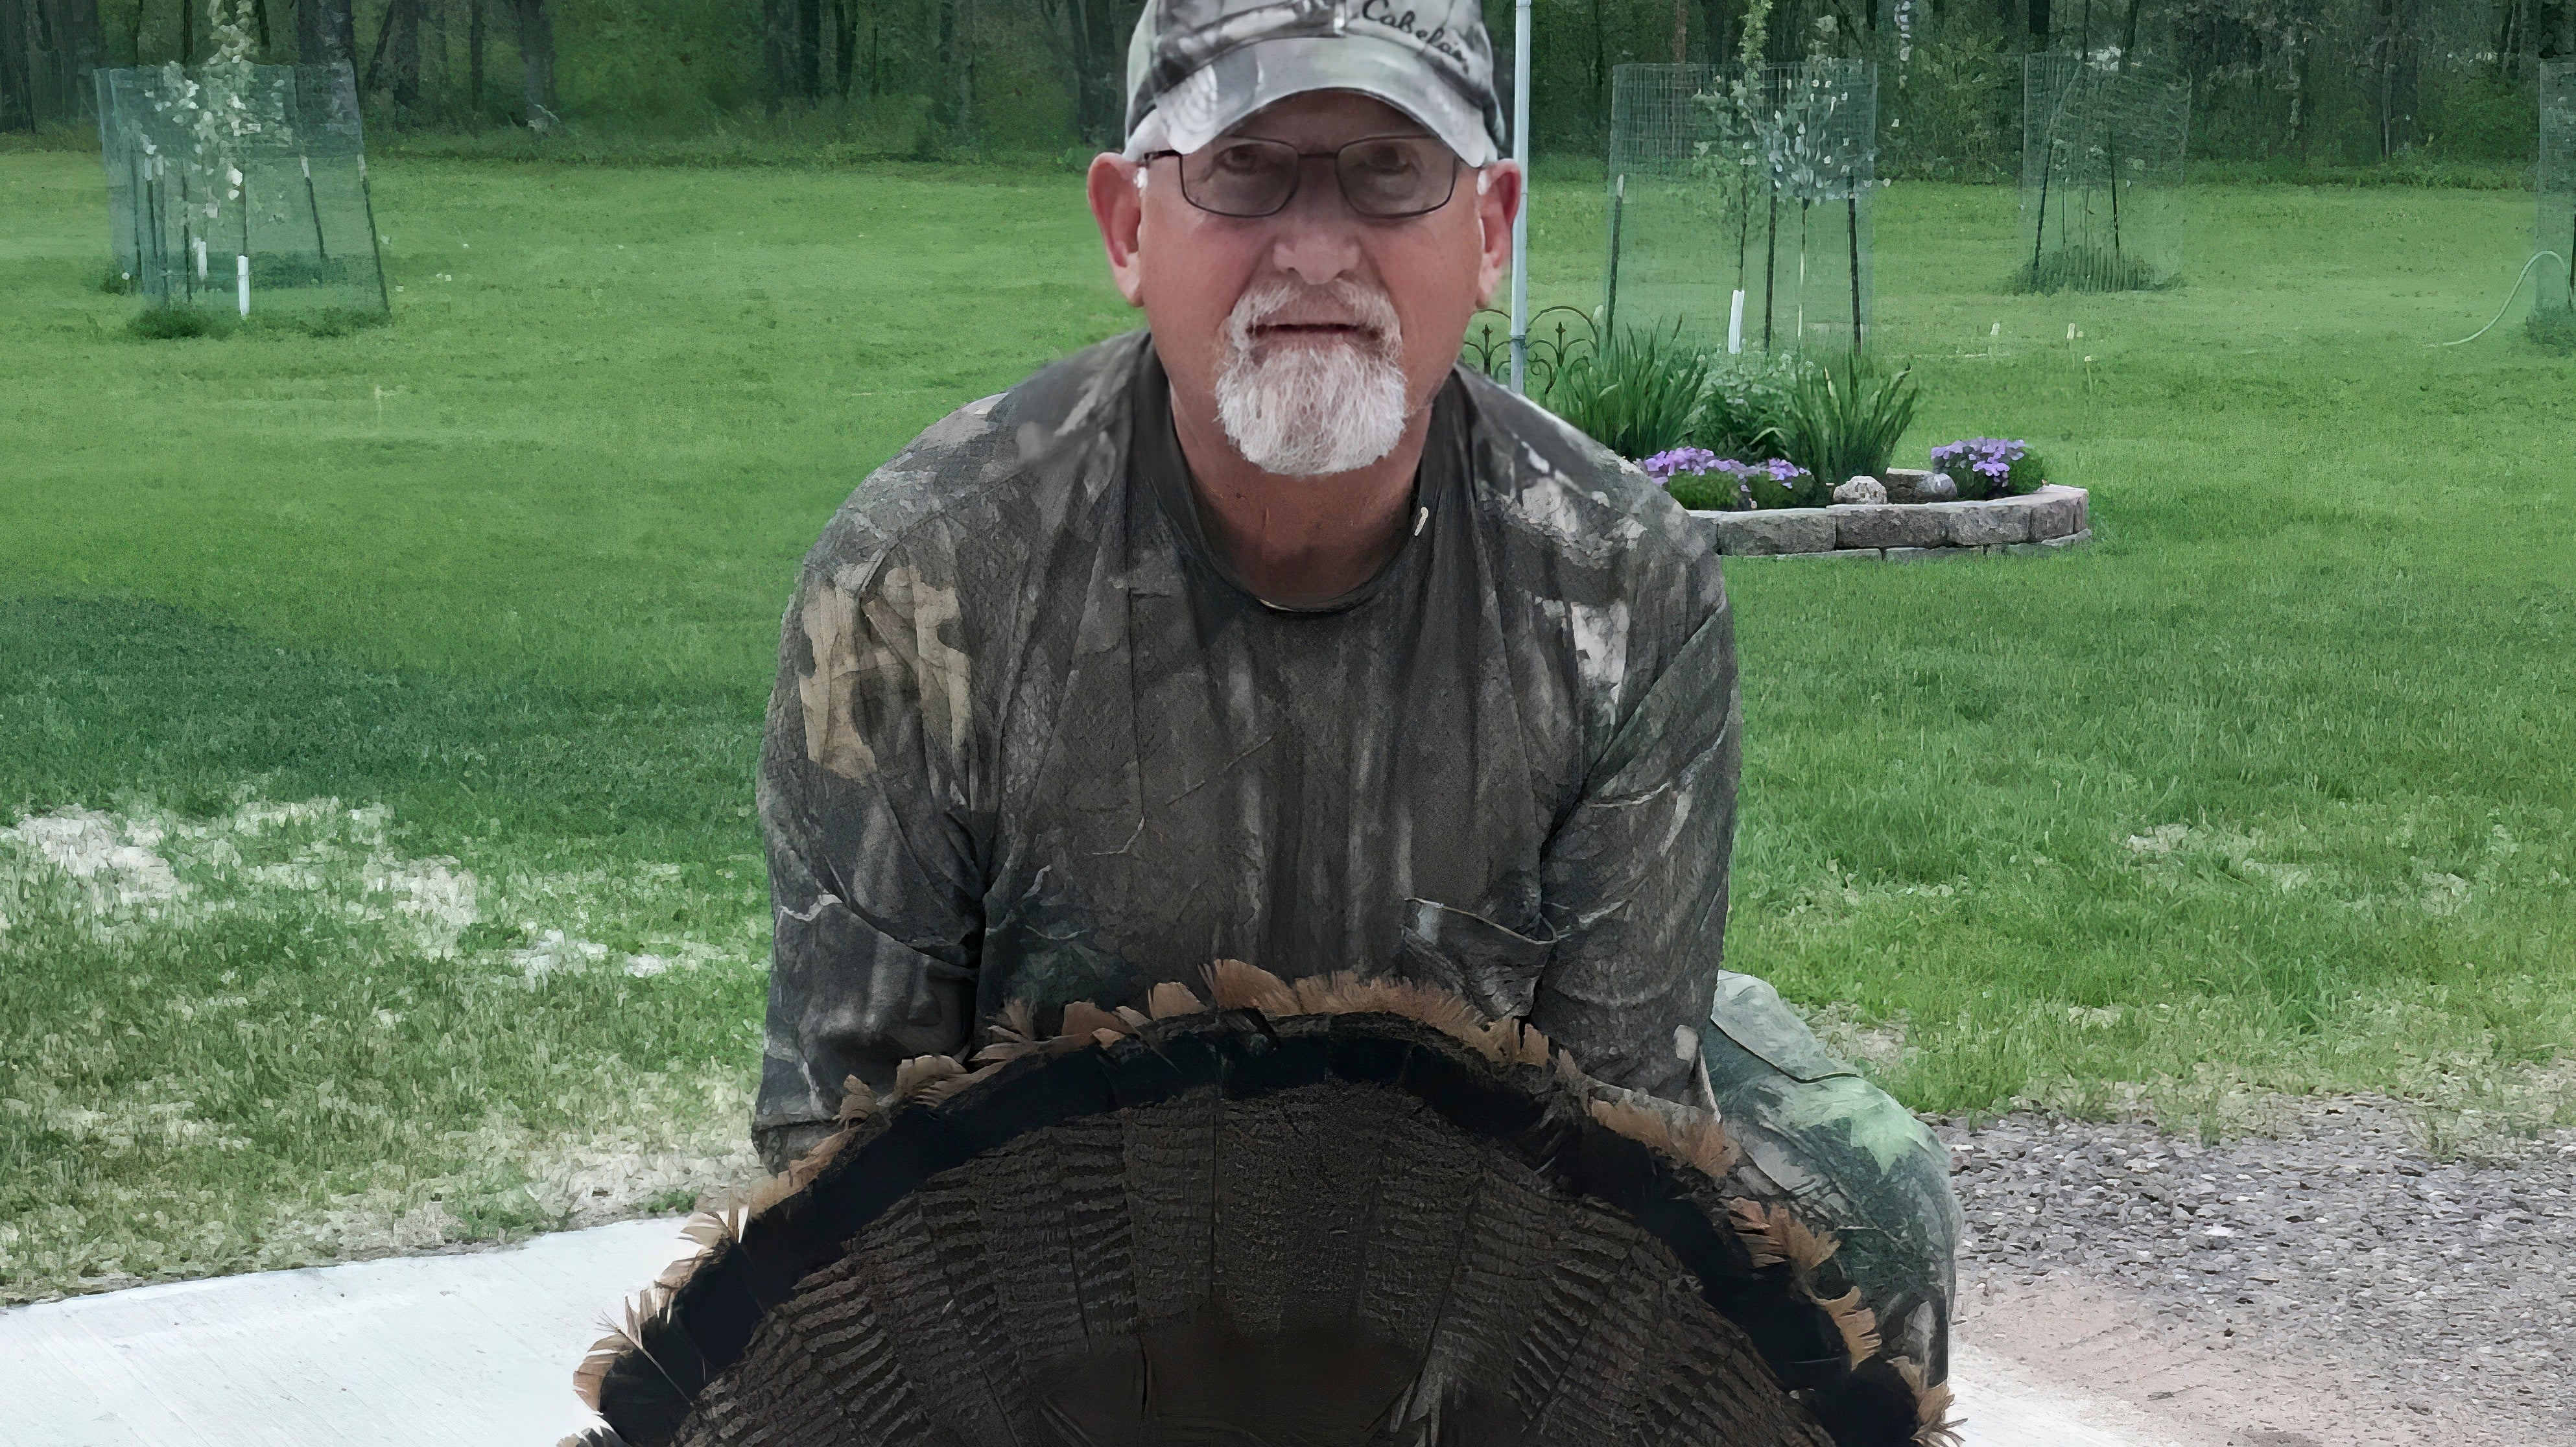 My New View on Turkey Hunting from an Interview with an Avid Hunter